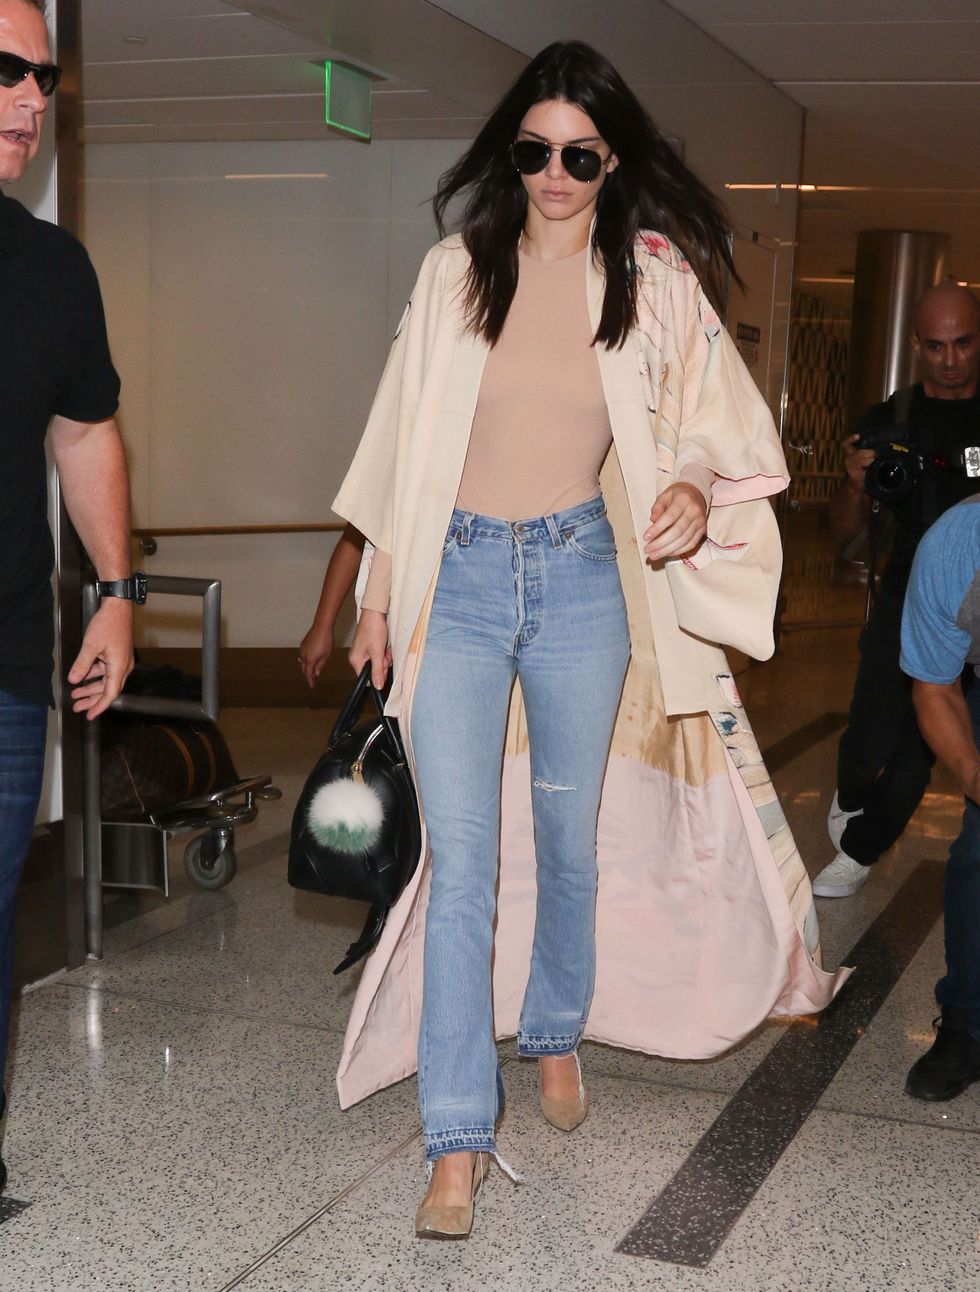 LOS ANGELES, CA - OCTOBER 17: Kendall Jenner is seen at LAX on October 17, 2015 in Los Angeles, California.  (Photo by gotpap/Bauer-Griffin/GC Images)